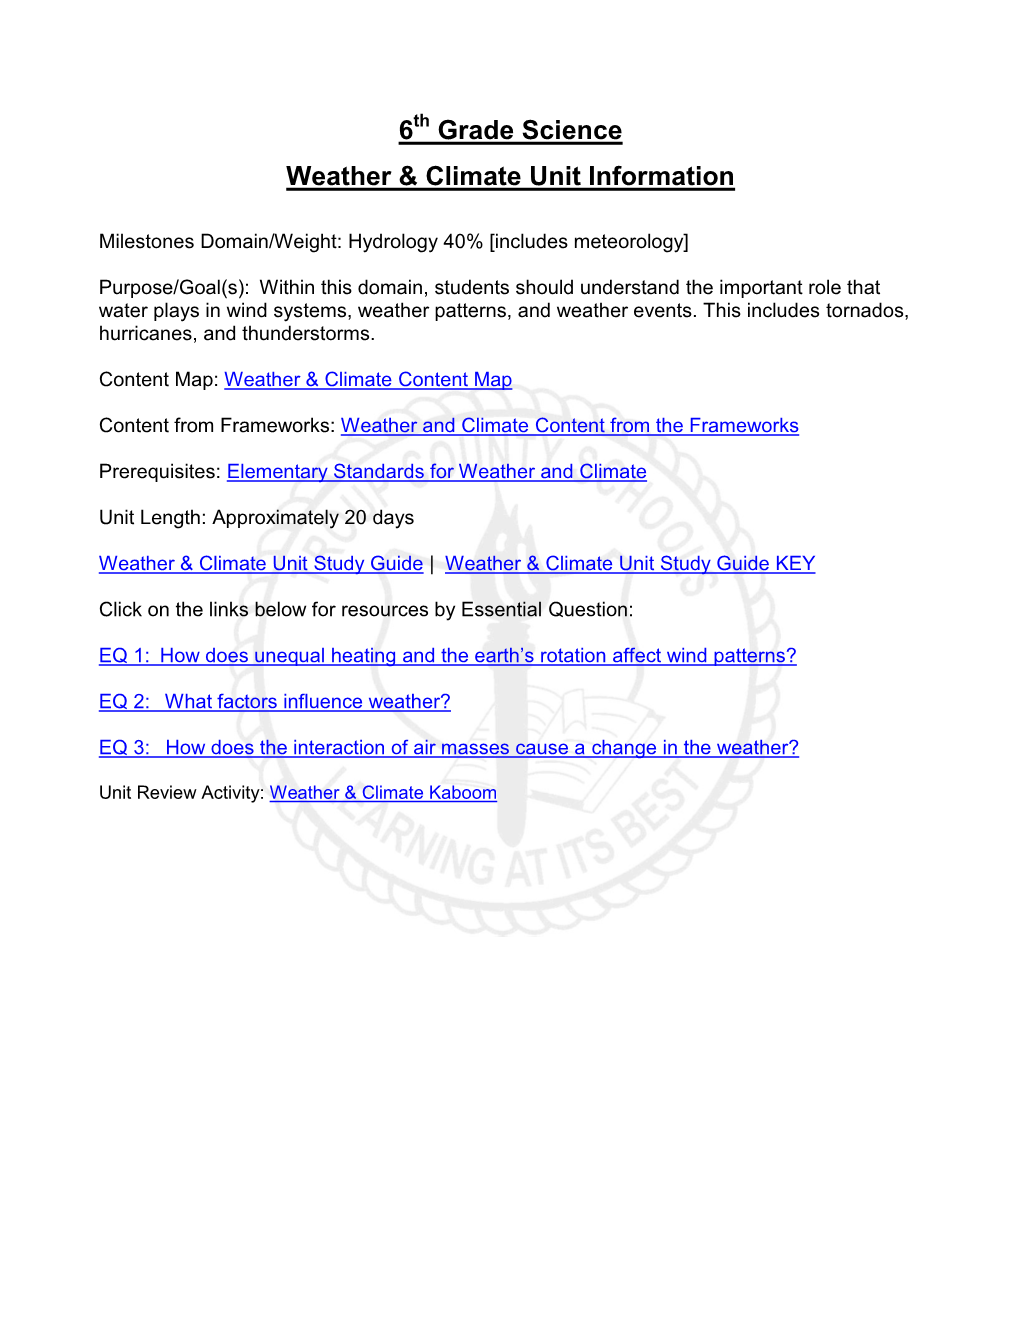 6 Grade Science Weather & Climate Unit Information